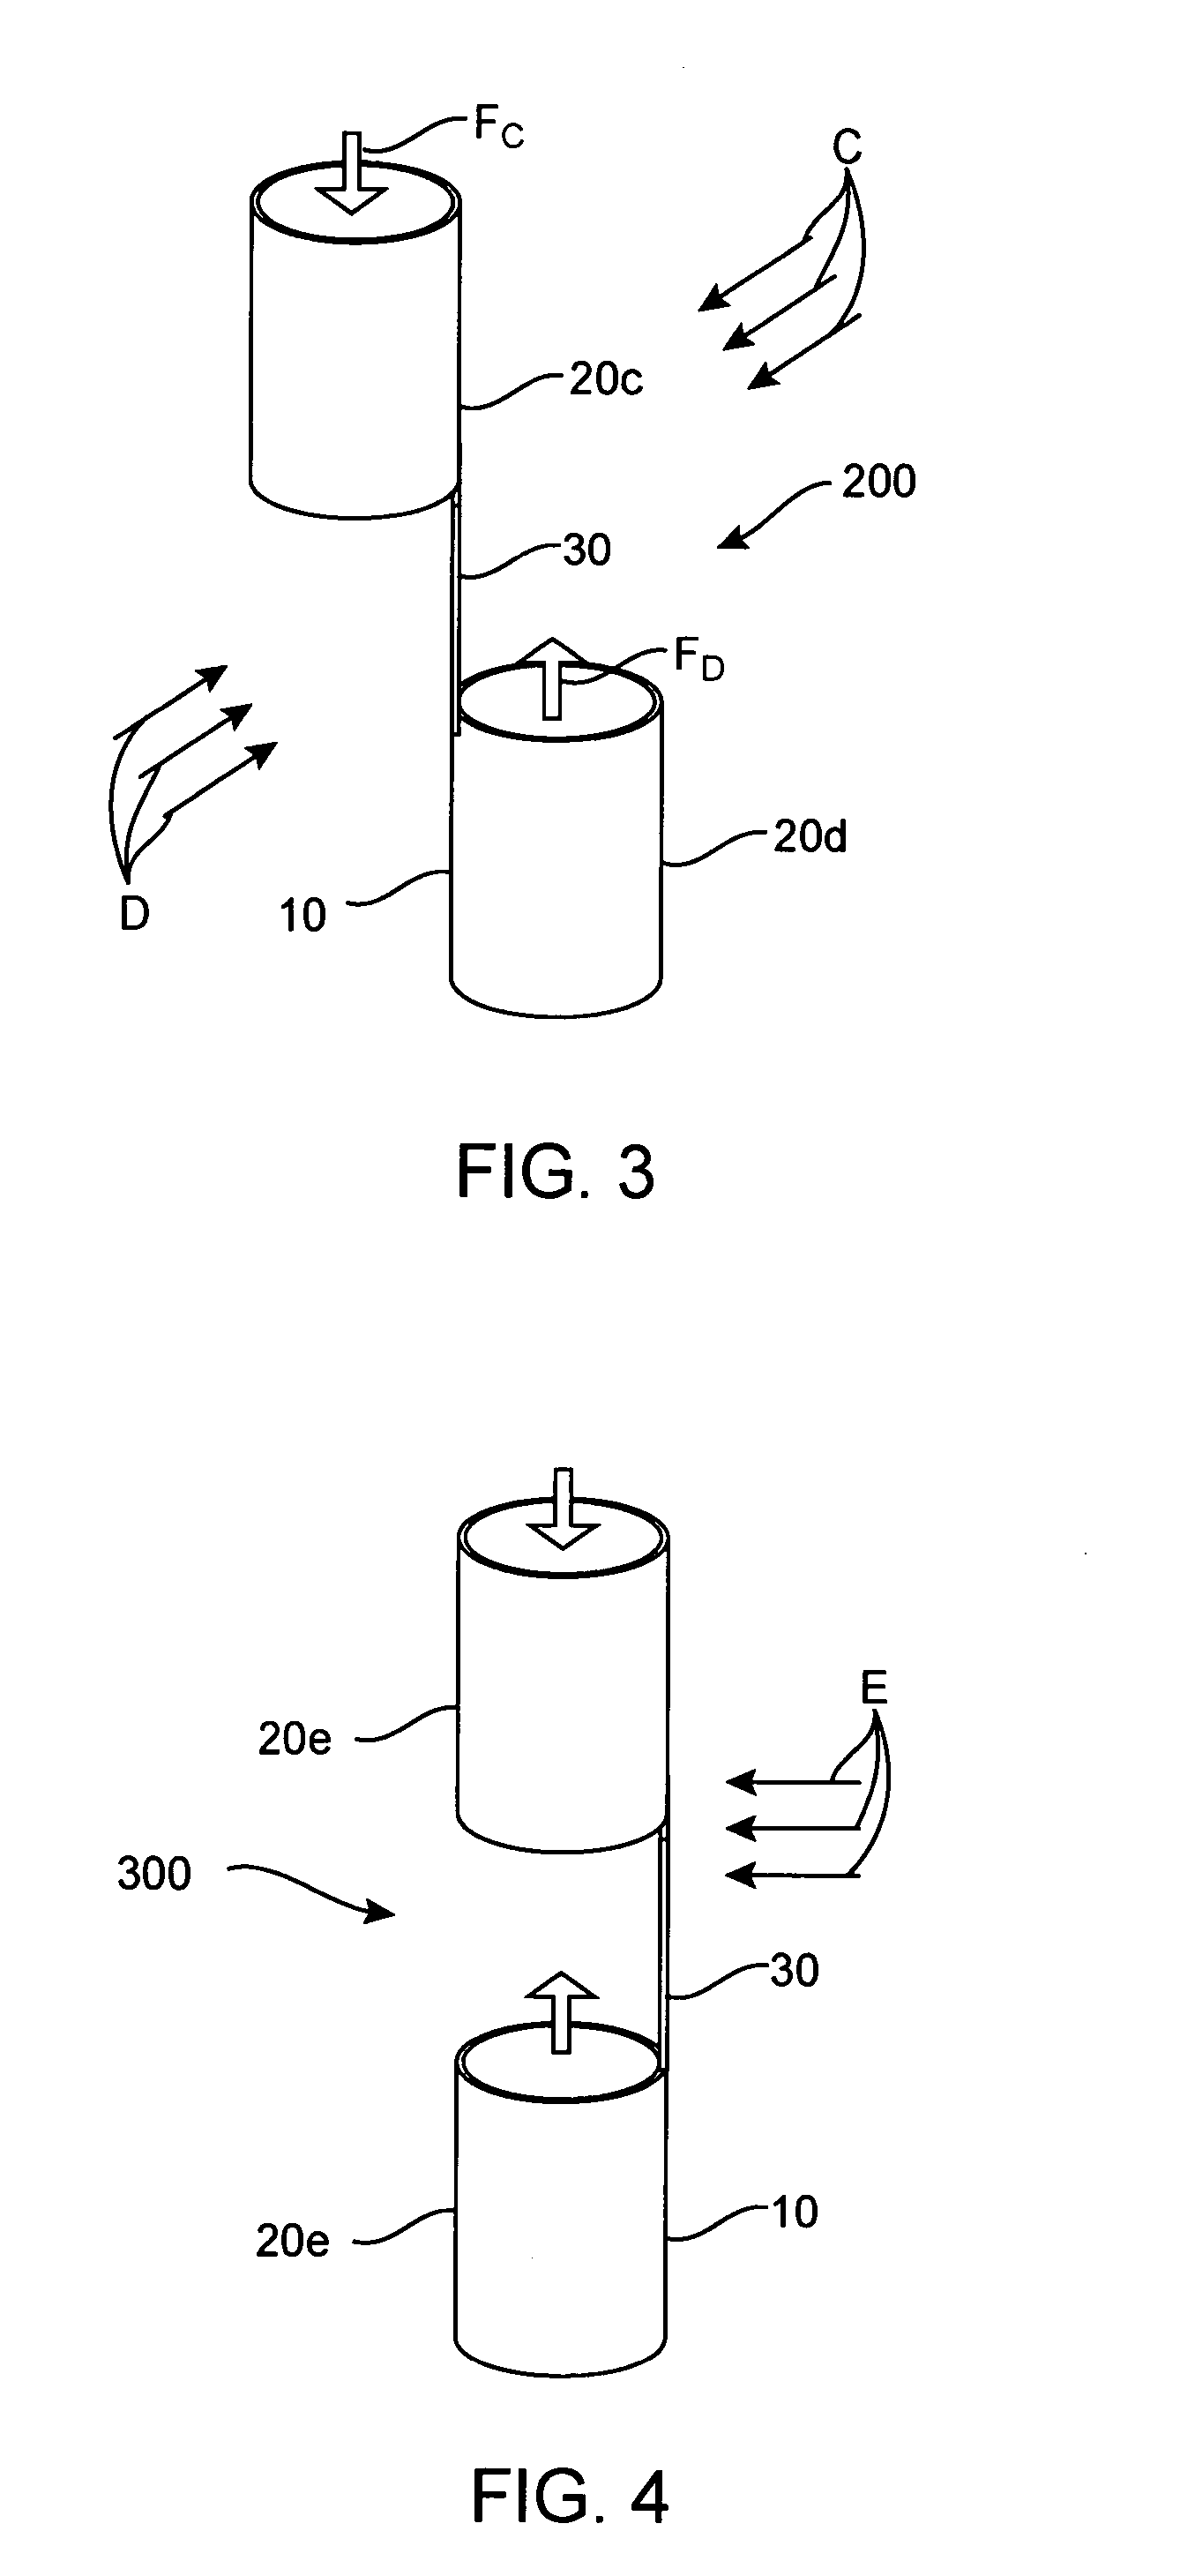 System and method for converting wind into mechanical energy for a building and the like